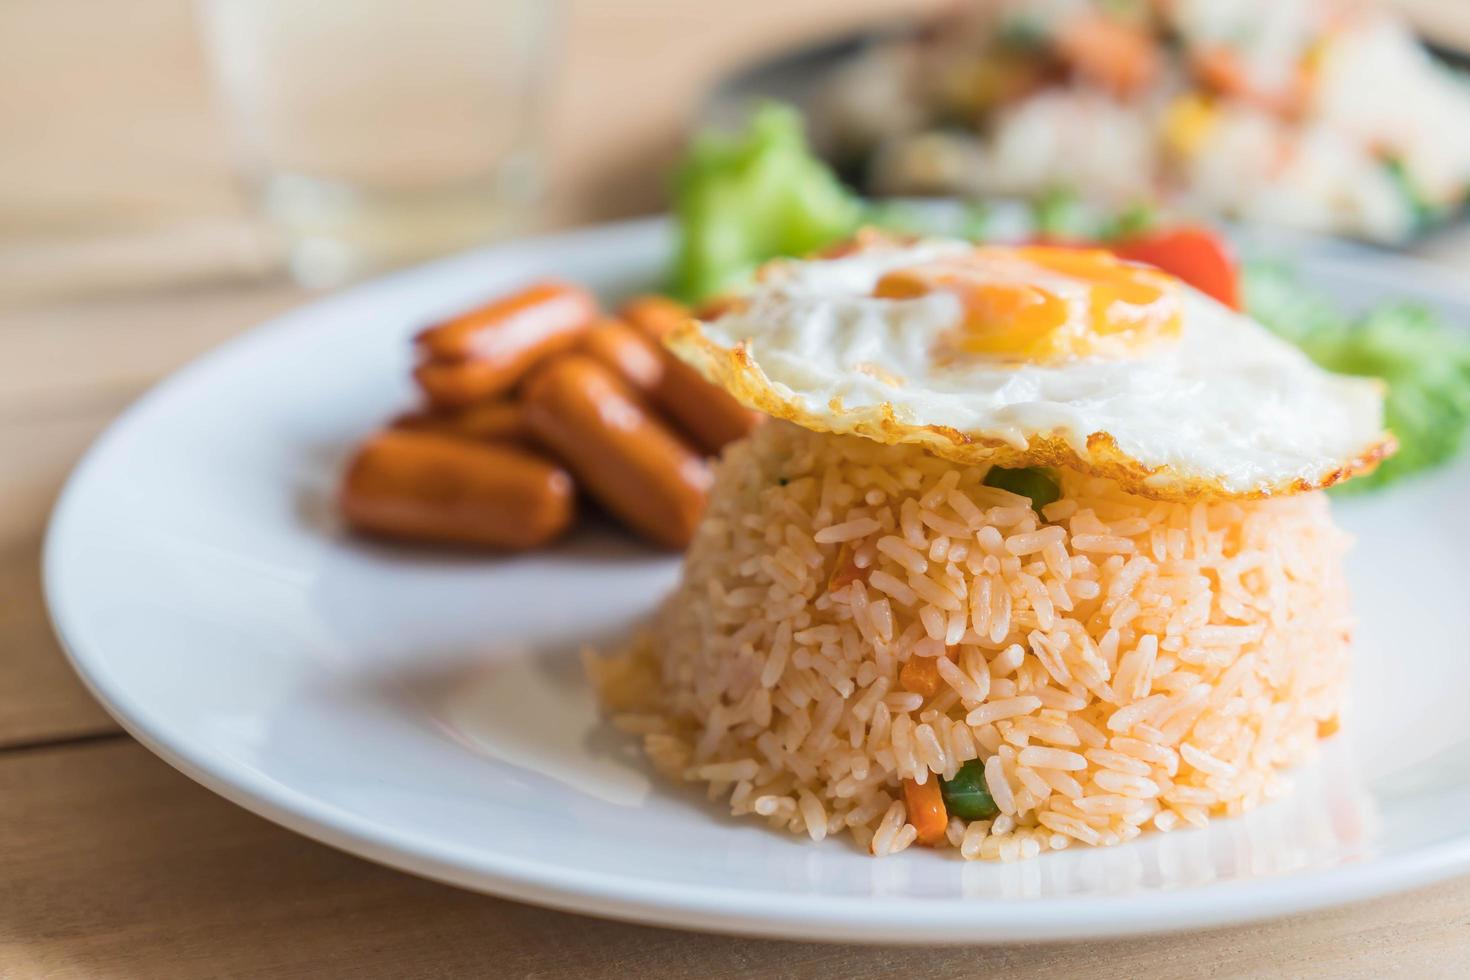 Plate with fried egg, rice, and sausage on it photo